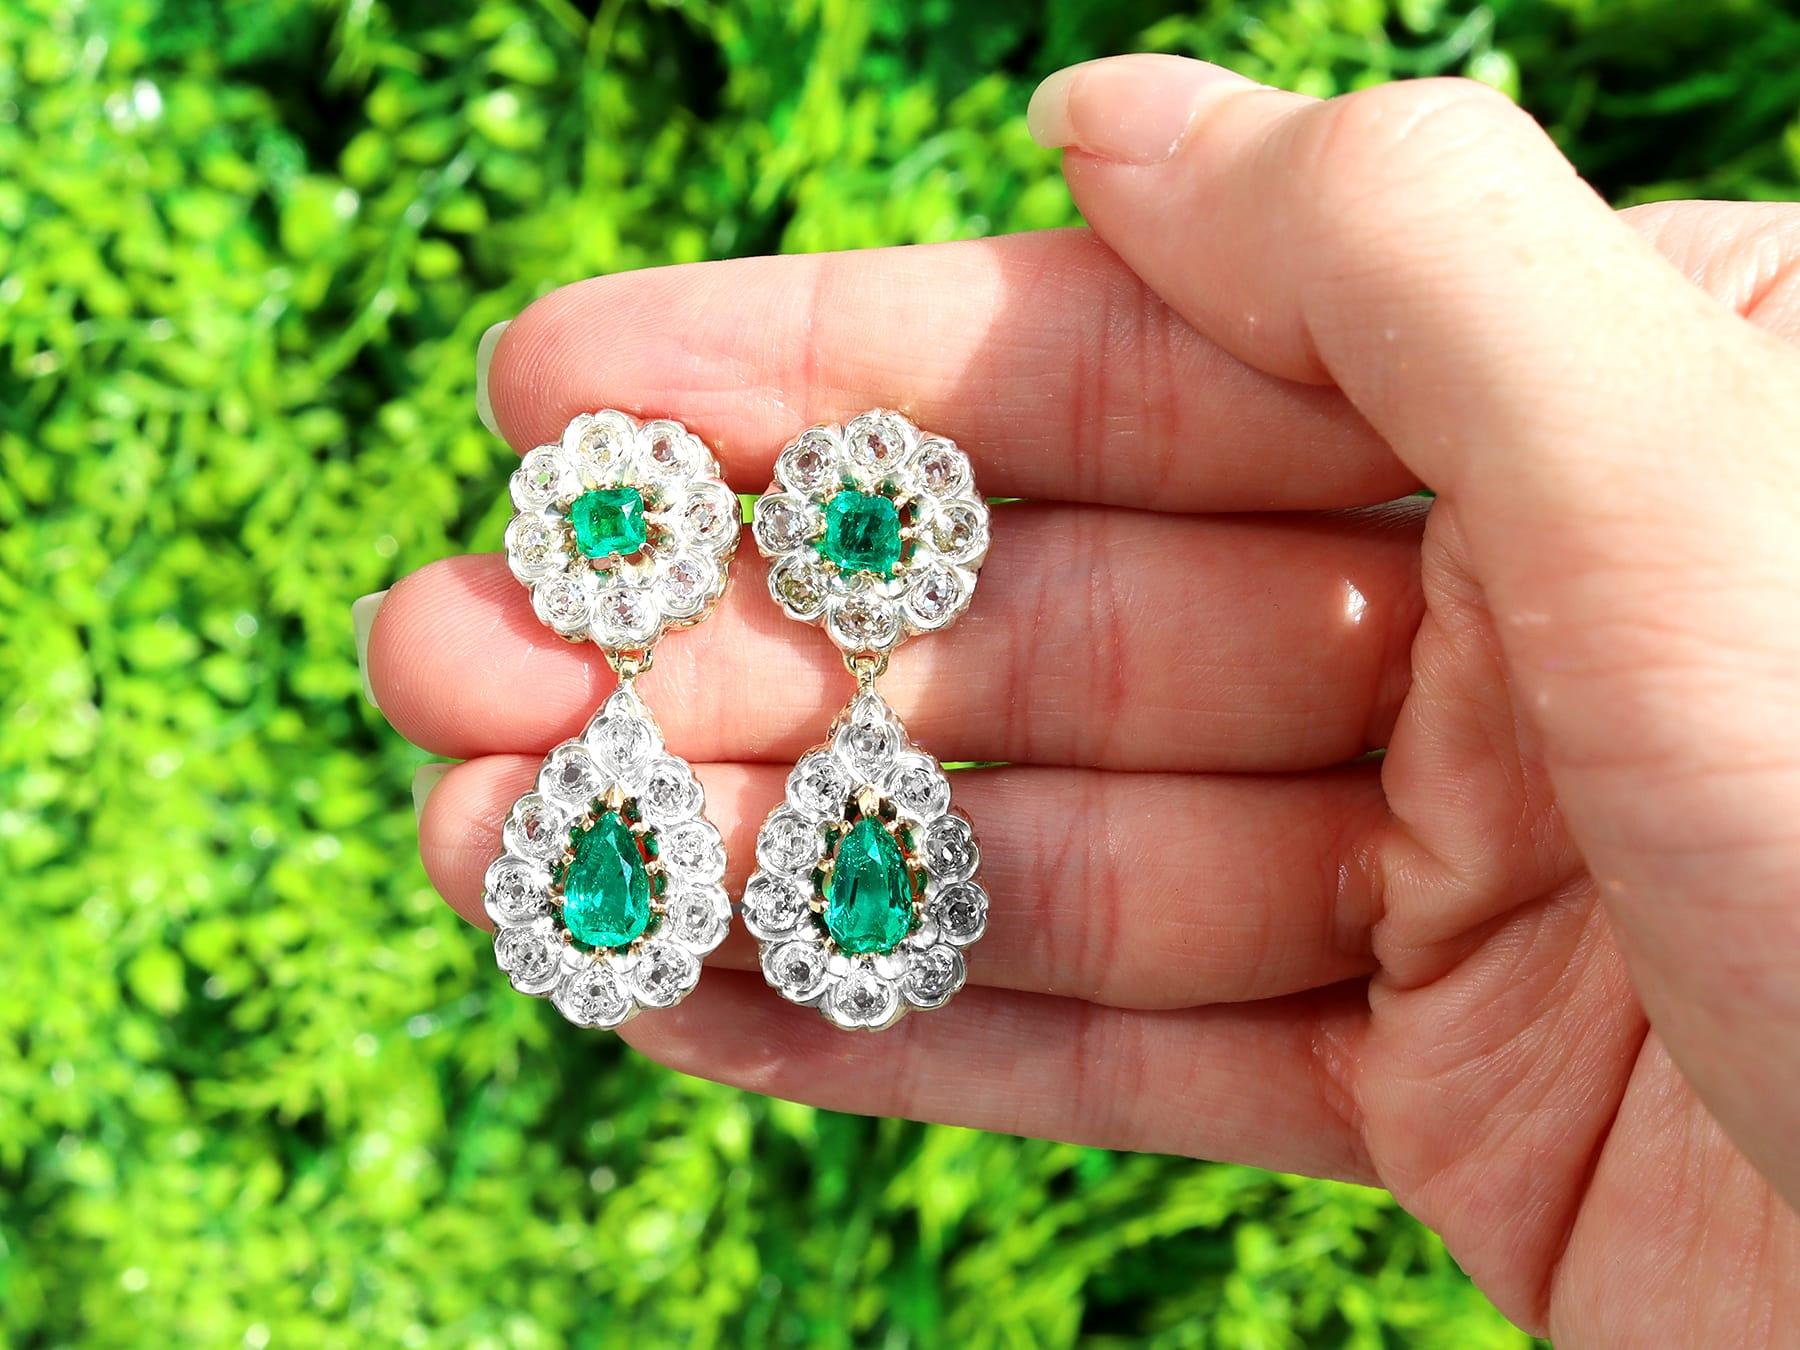 A stunning pair of Victorian 3.18 Ct emerald and 3.23 Ct diamond, 12k yellow gold and silver set drop earrings; part of our diverse antique jewelry collections.

These stunning, fine and impressive Victorian emerald earrings have been crafted in 12k